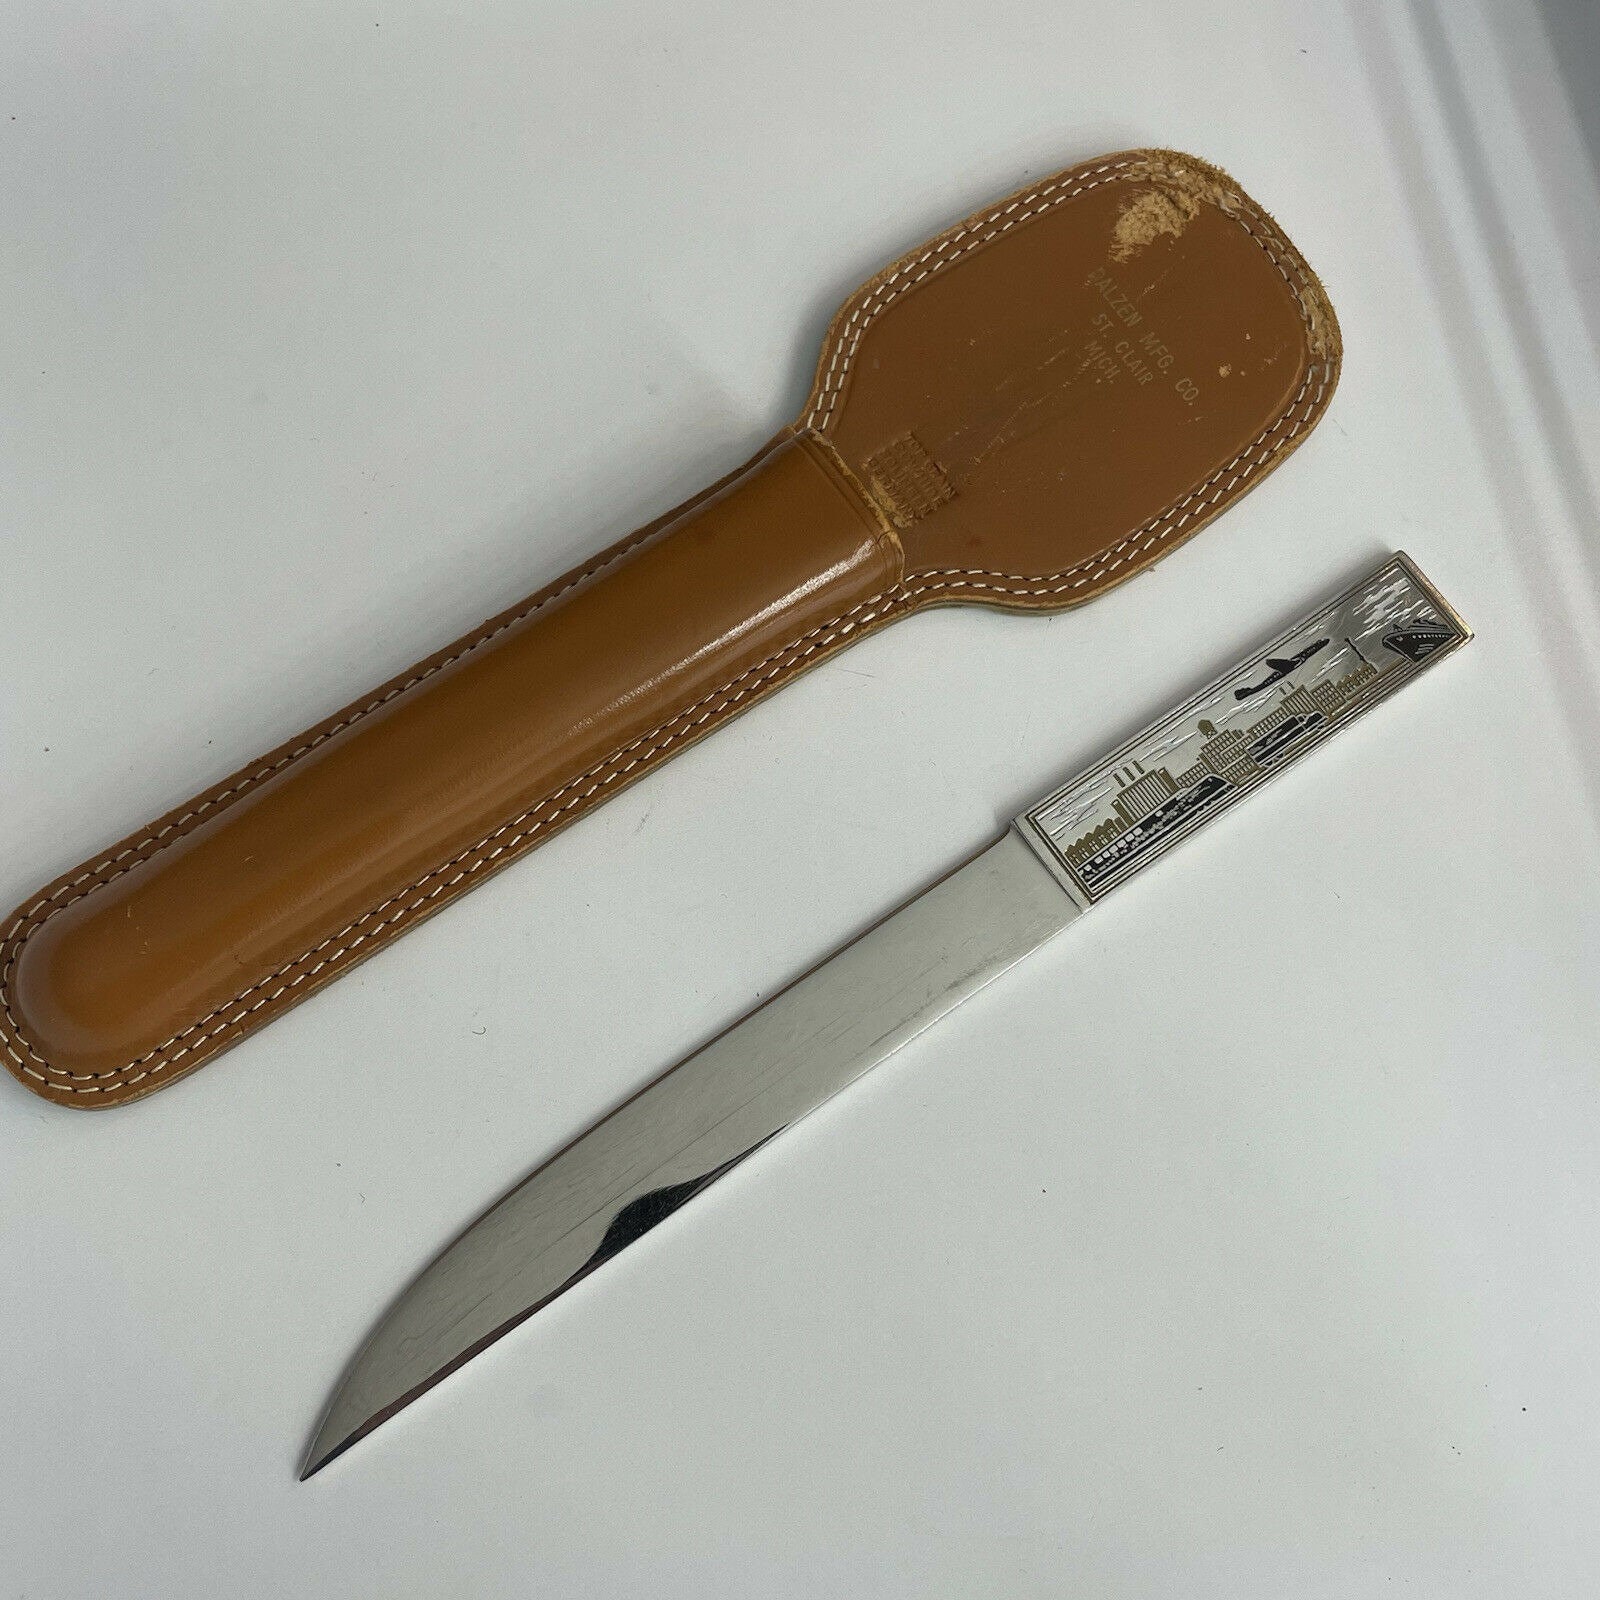 RS letter opener Solingen Germany 7.5 inches long